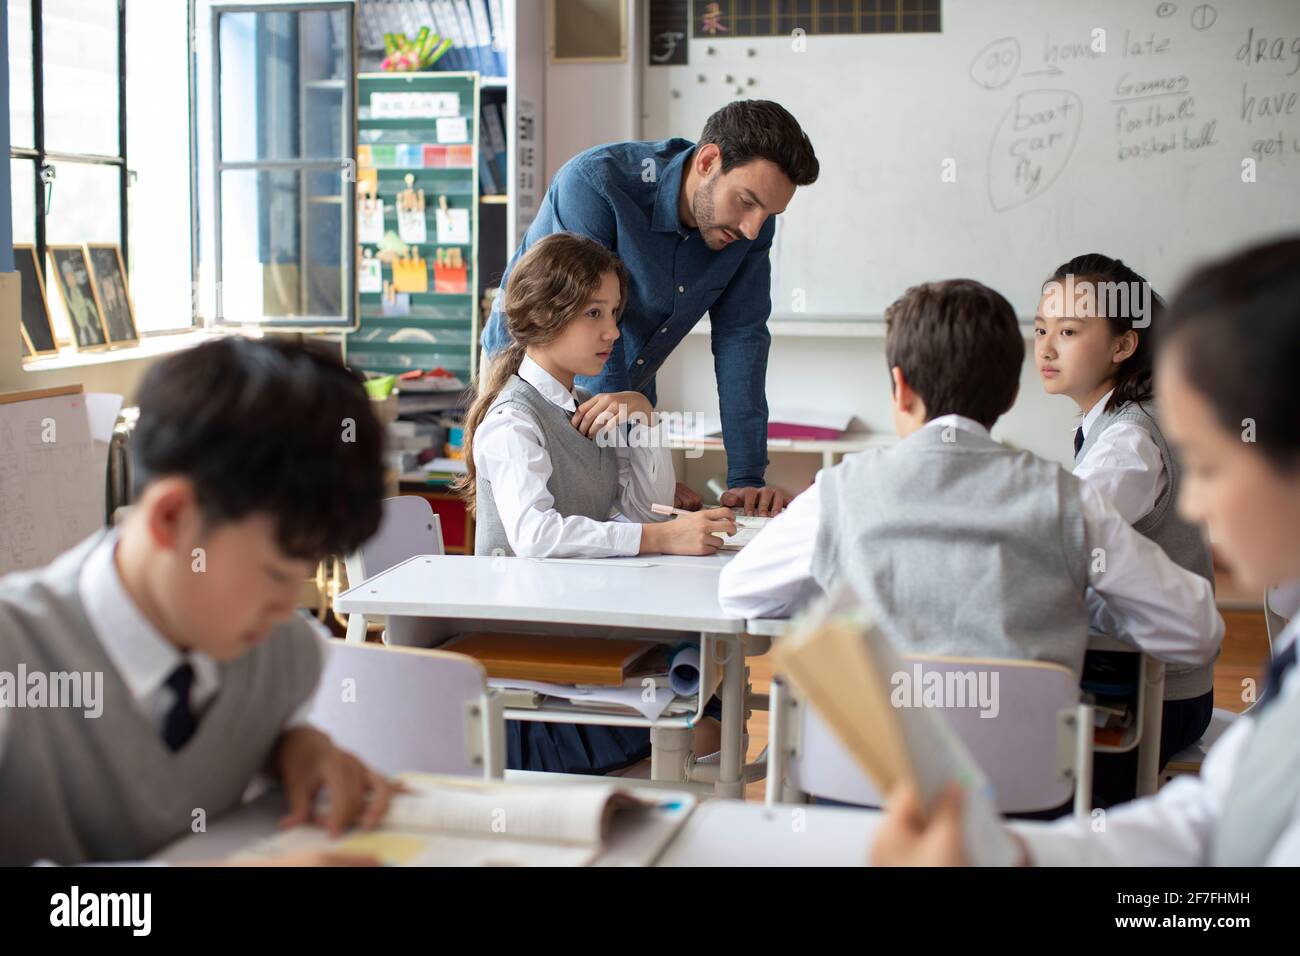 Students learning in classroom Stock Photo